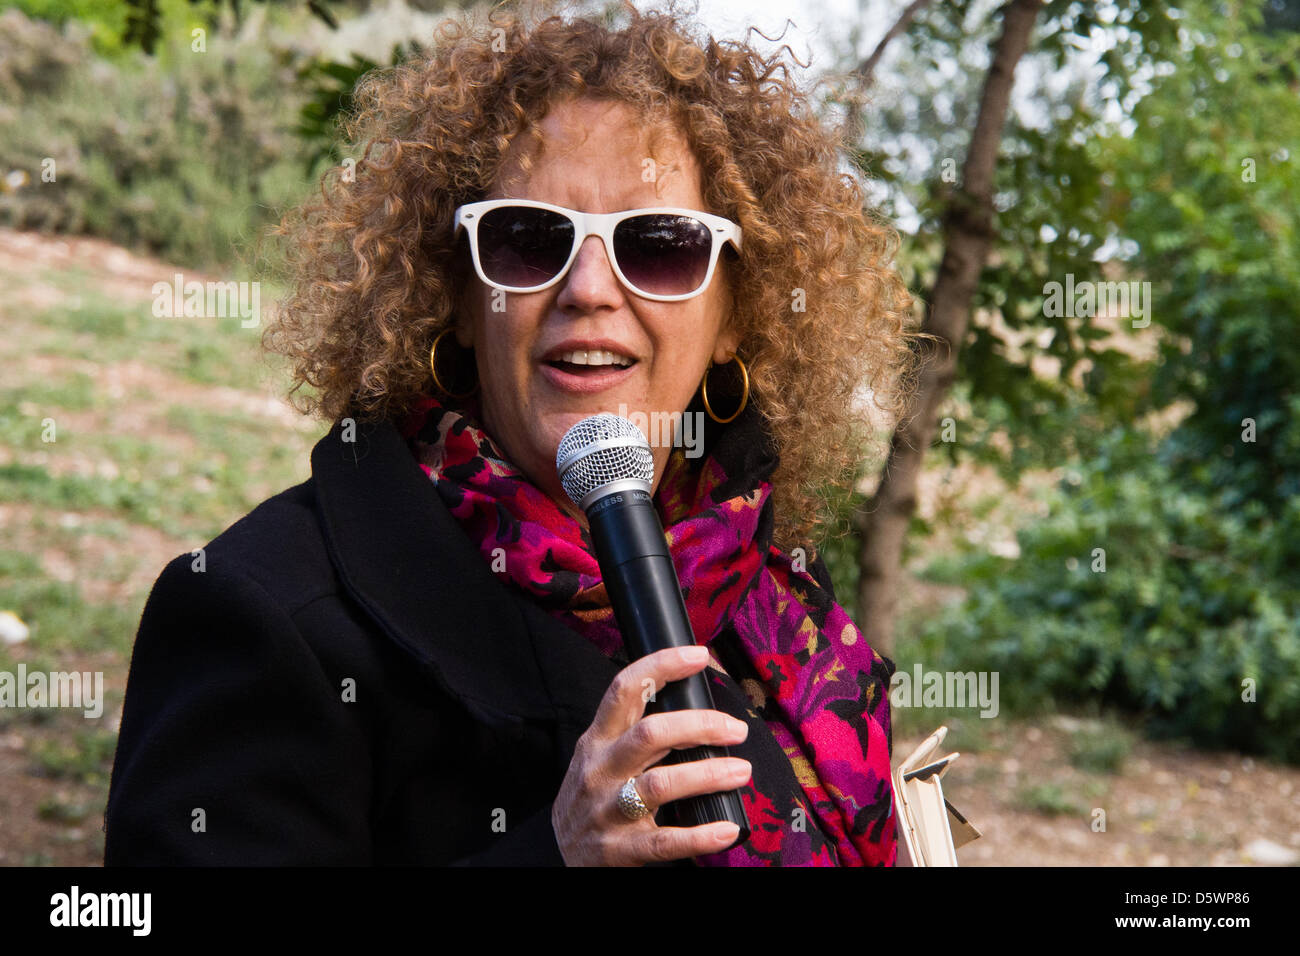 Jerusalem, Israel. 9-Apr-2013. Ayelet Ofir, daughter of a 1948 Irgun fighter who took part in the Deir Yassin invasion, speaks of growing up in the shadow of accusations and guilt.   Deir Yassin, a pre-1948 Arab village adjacent to Jerusalem with a population of about 600, was invaded by paramilitaries from the Jewish Irgun and Lehi groups on April 9, 1948 and around 115 villagers were massacred. Credit: Nir Alon/Alamy Live News Stock Photo